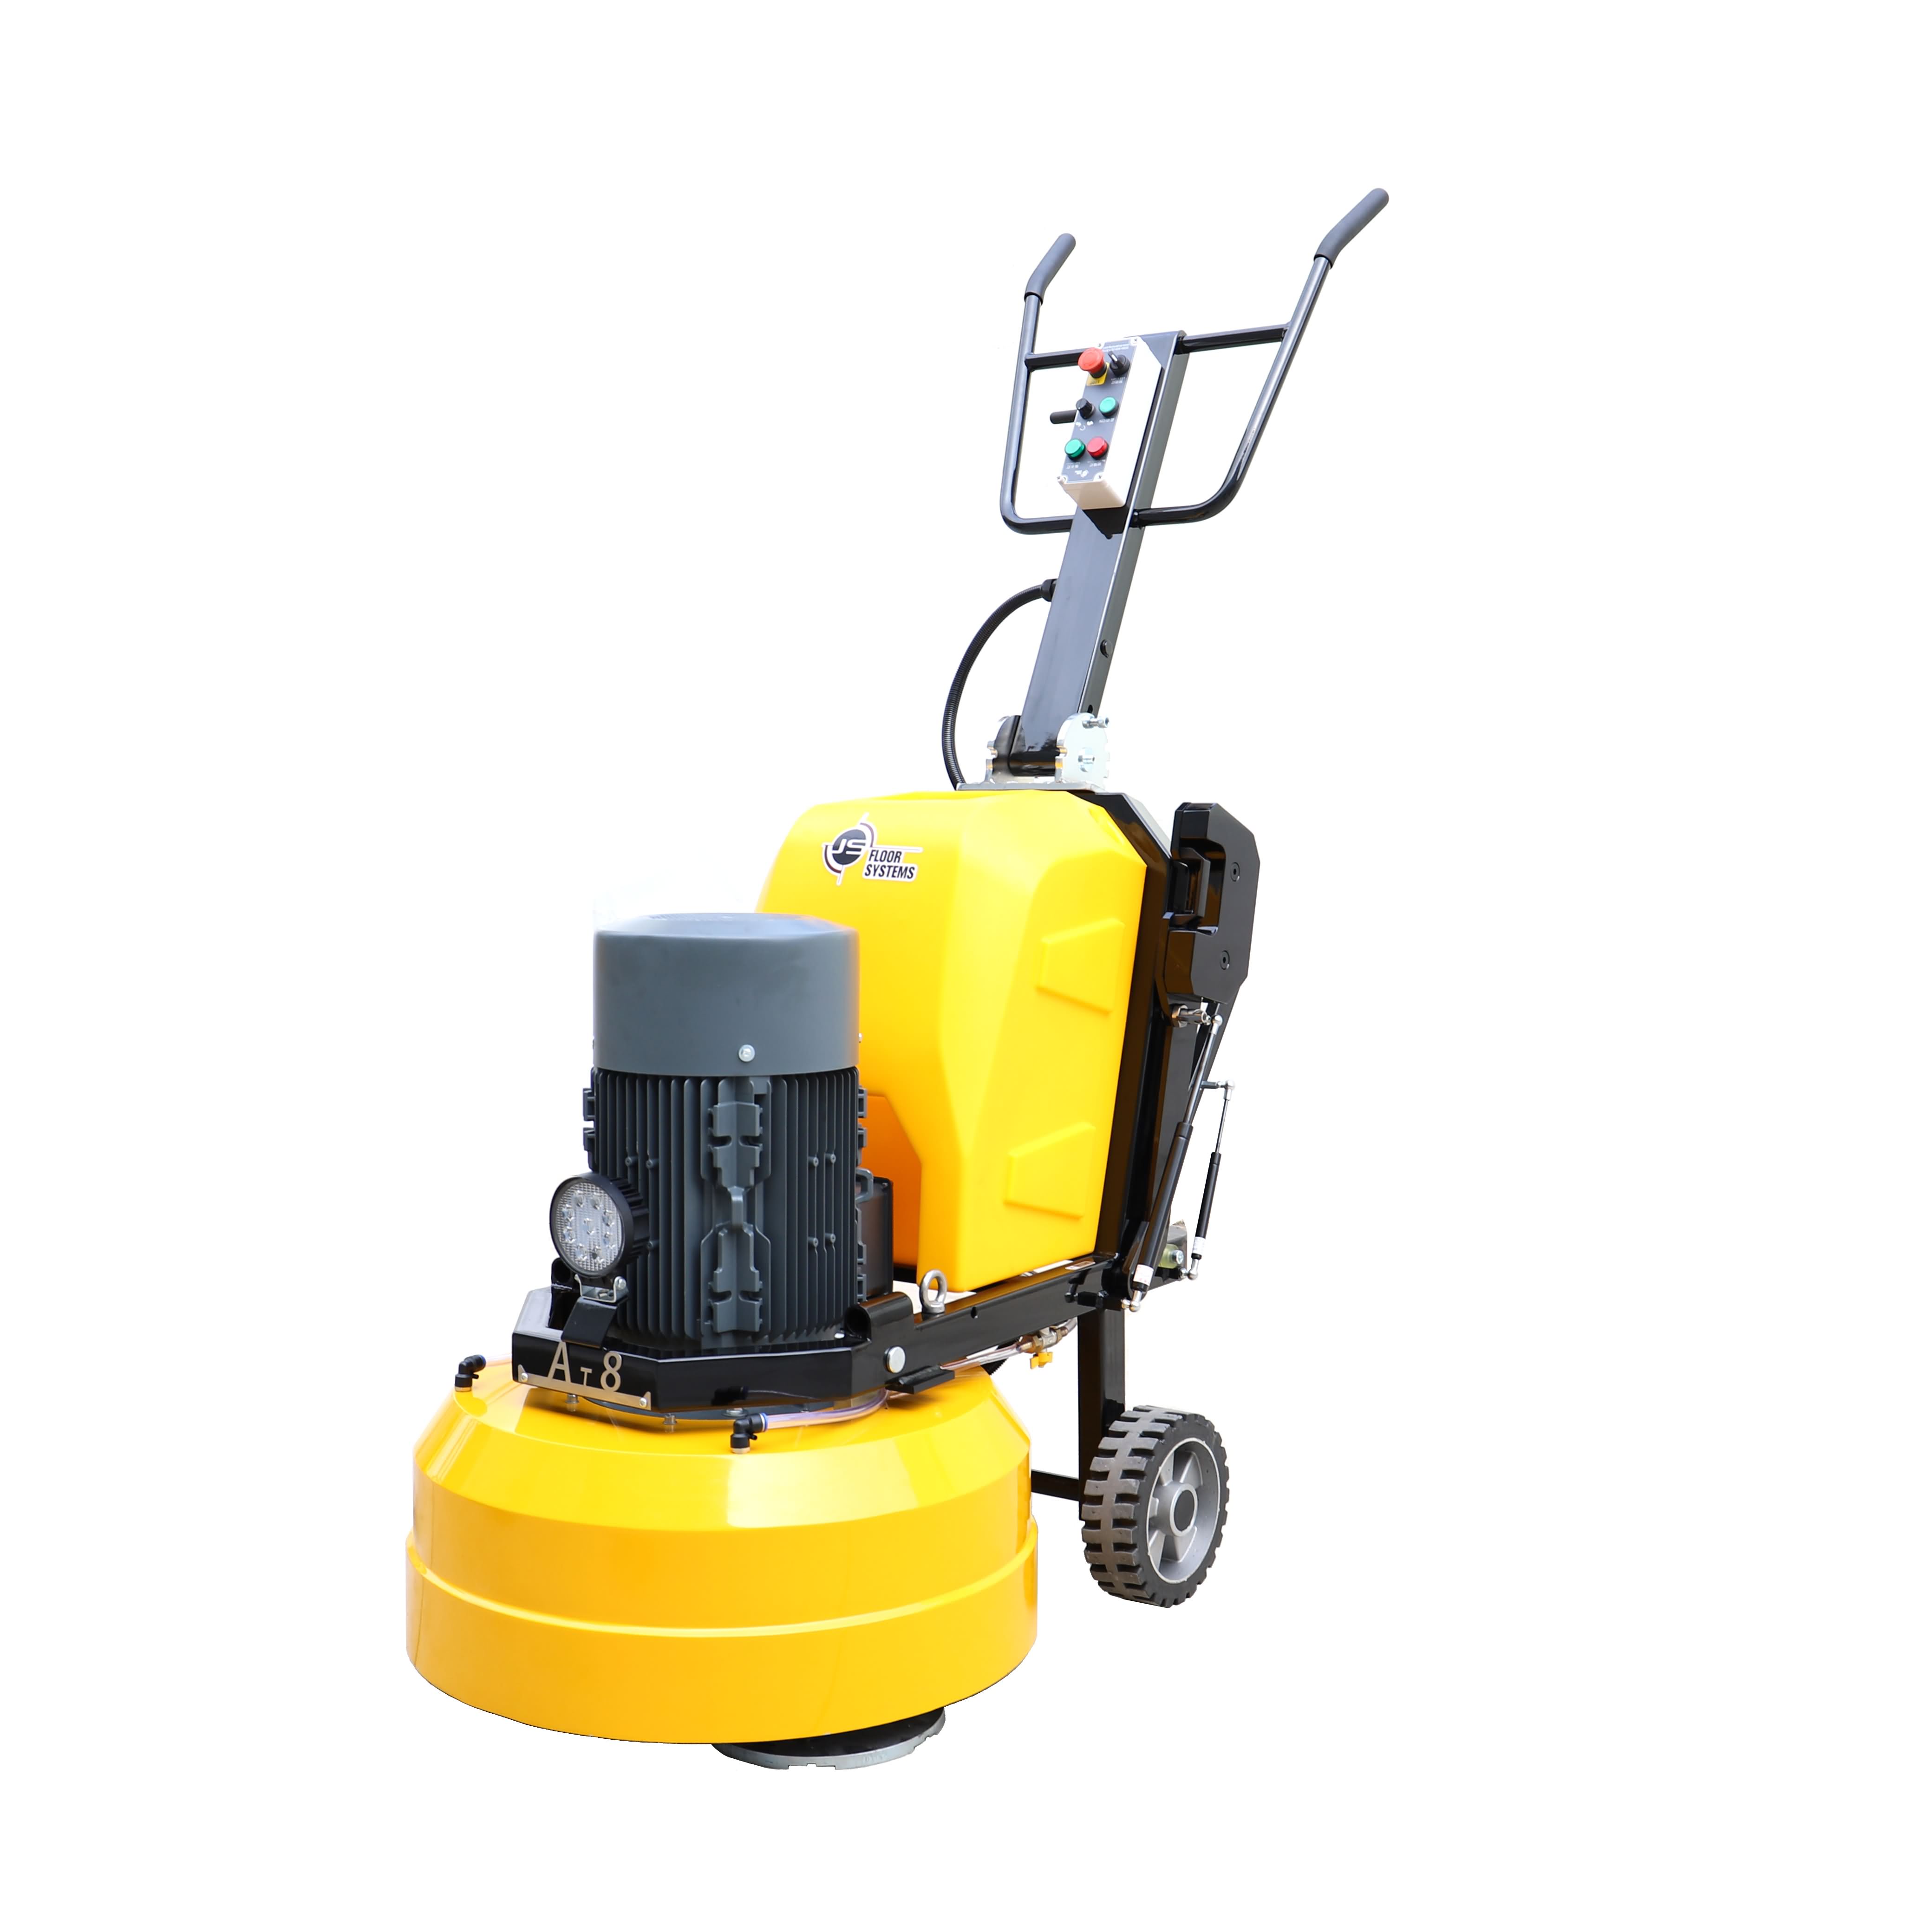 Hand-push Concrete Floor Grinder Easy to Operate Ground Grinding Machine 220V